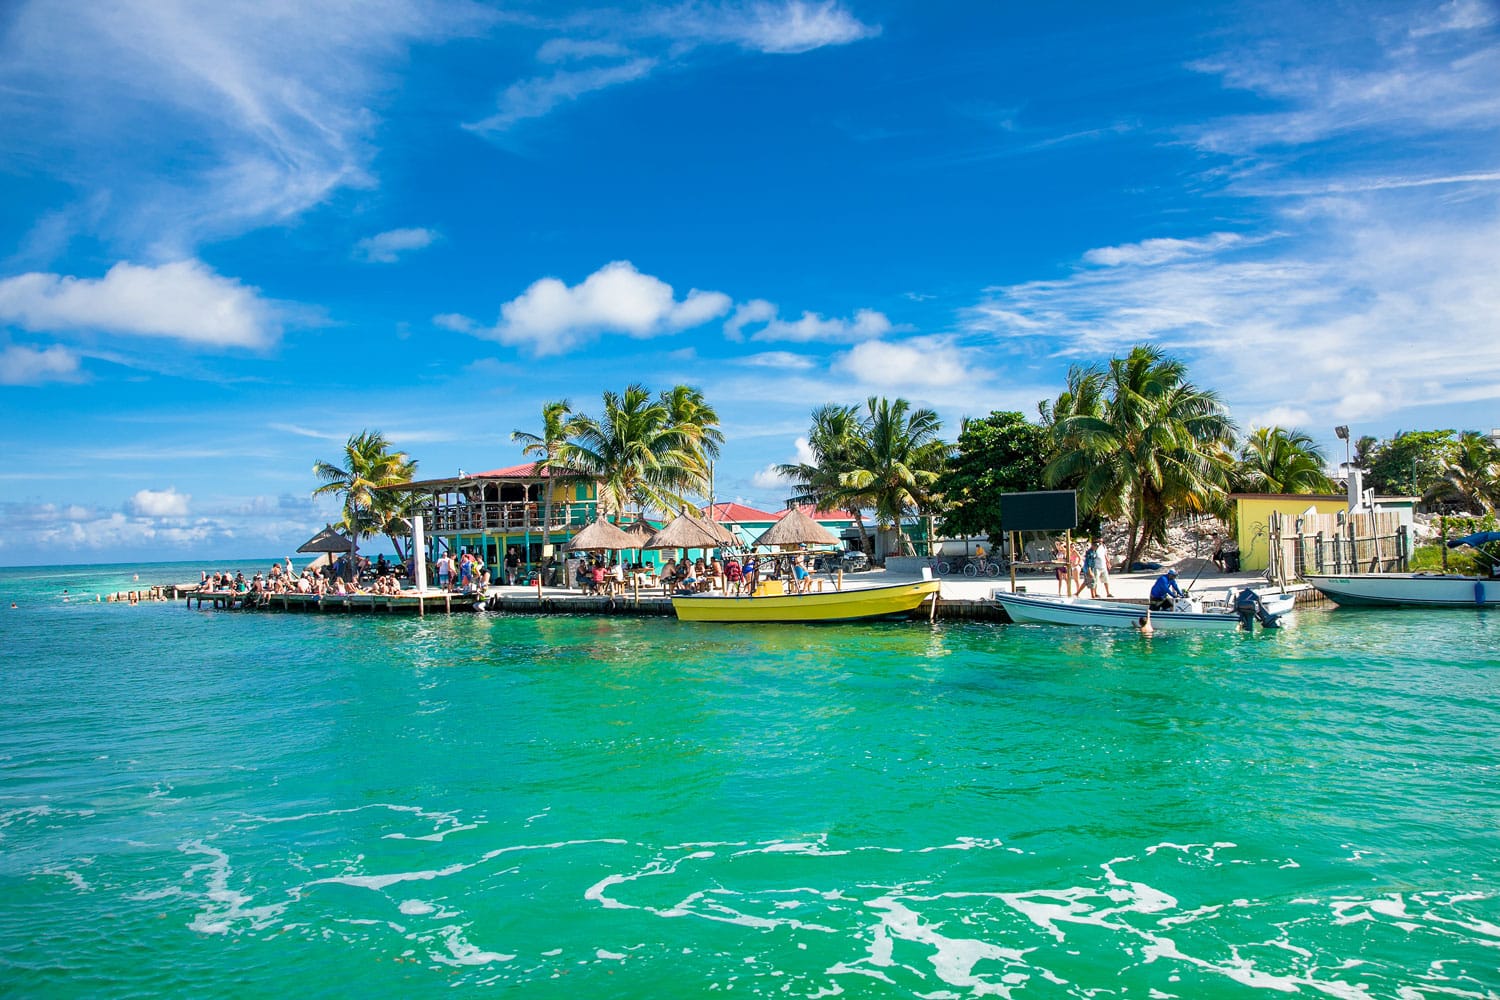 Beautiful caribbean sight with turquoise water in Caye Caulker island, Belize.